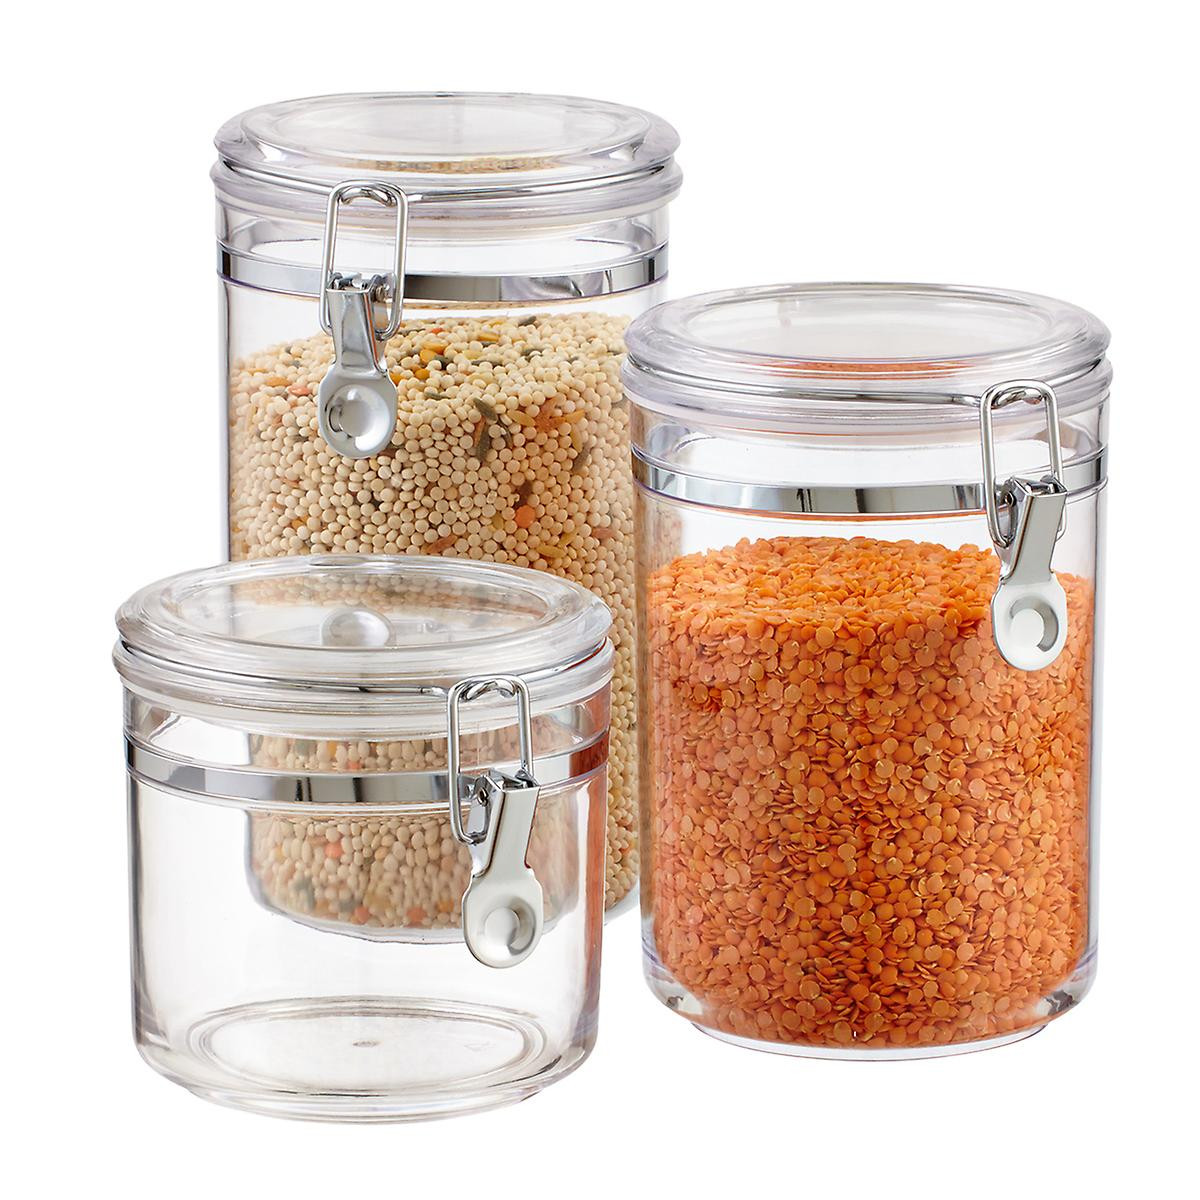 Kitchen Storage Canister
 Hermetic Acrylic Canisters